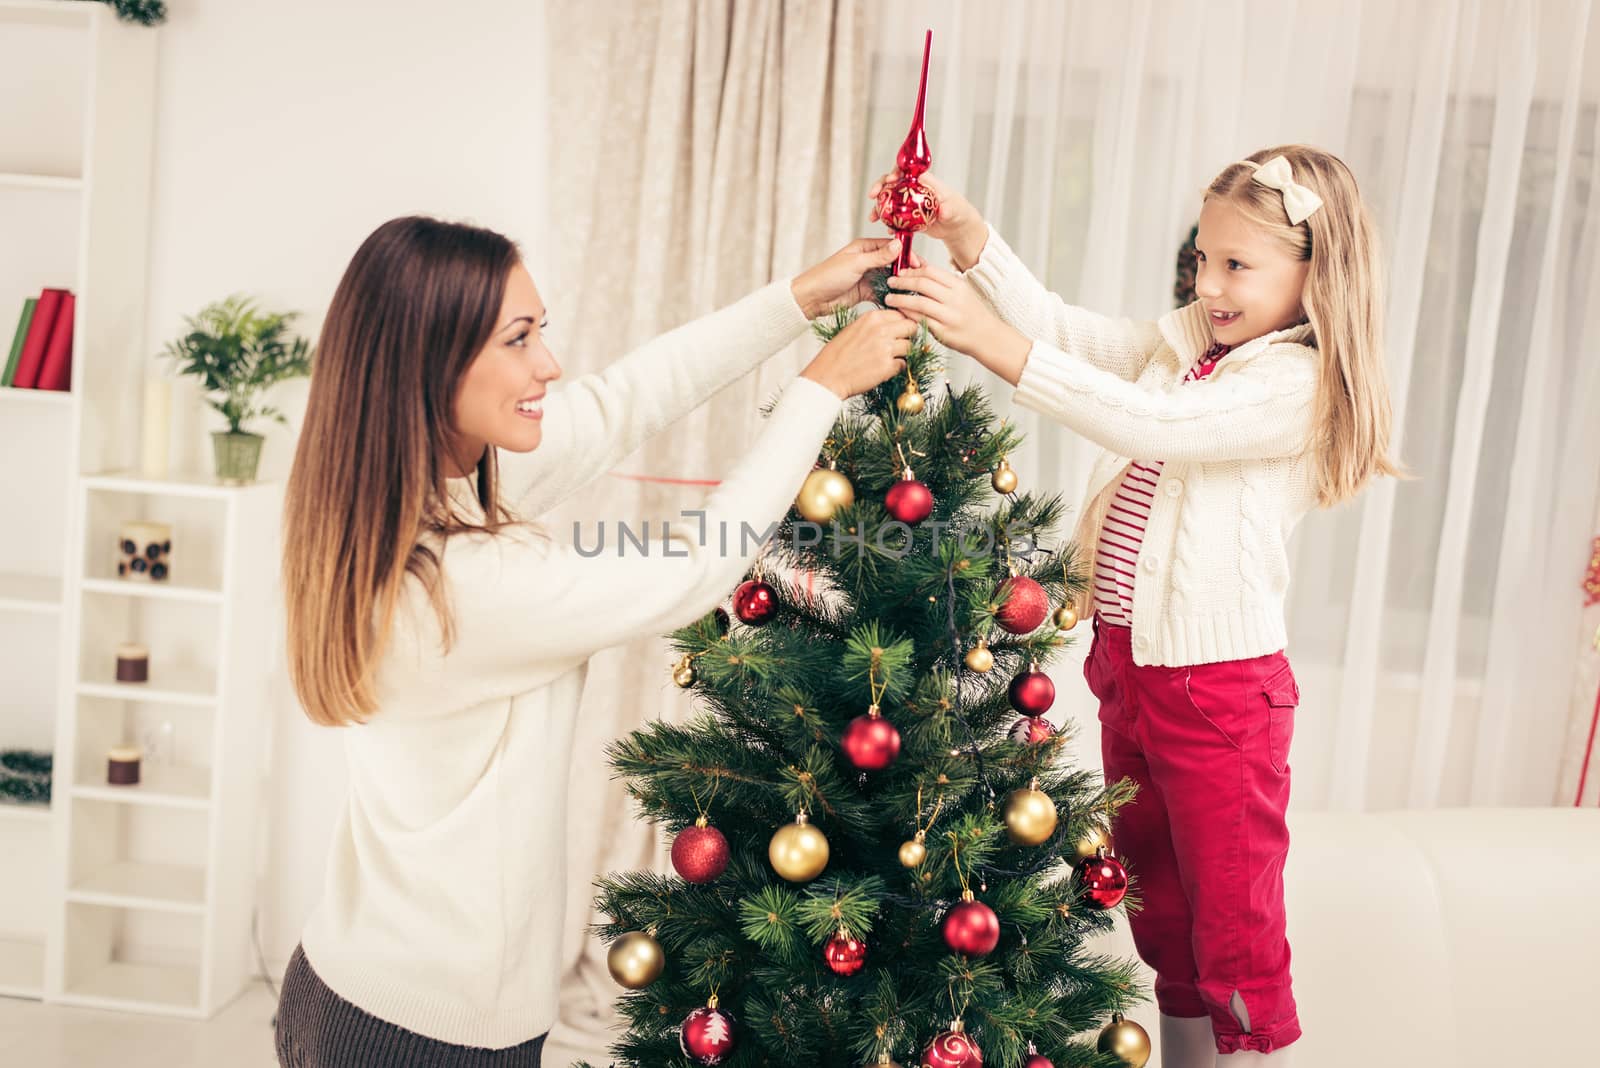 Young mother and her daughter decorating Christmas tree at home. 